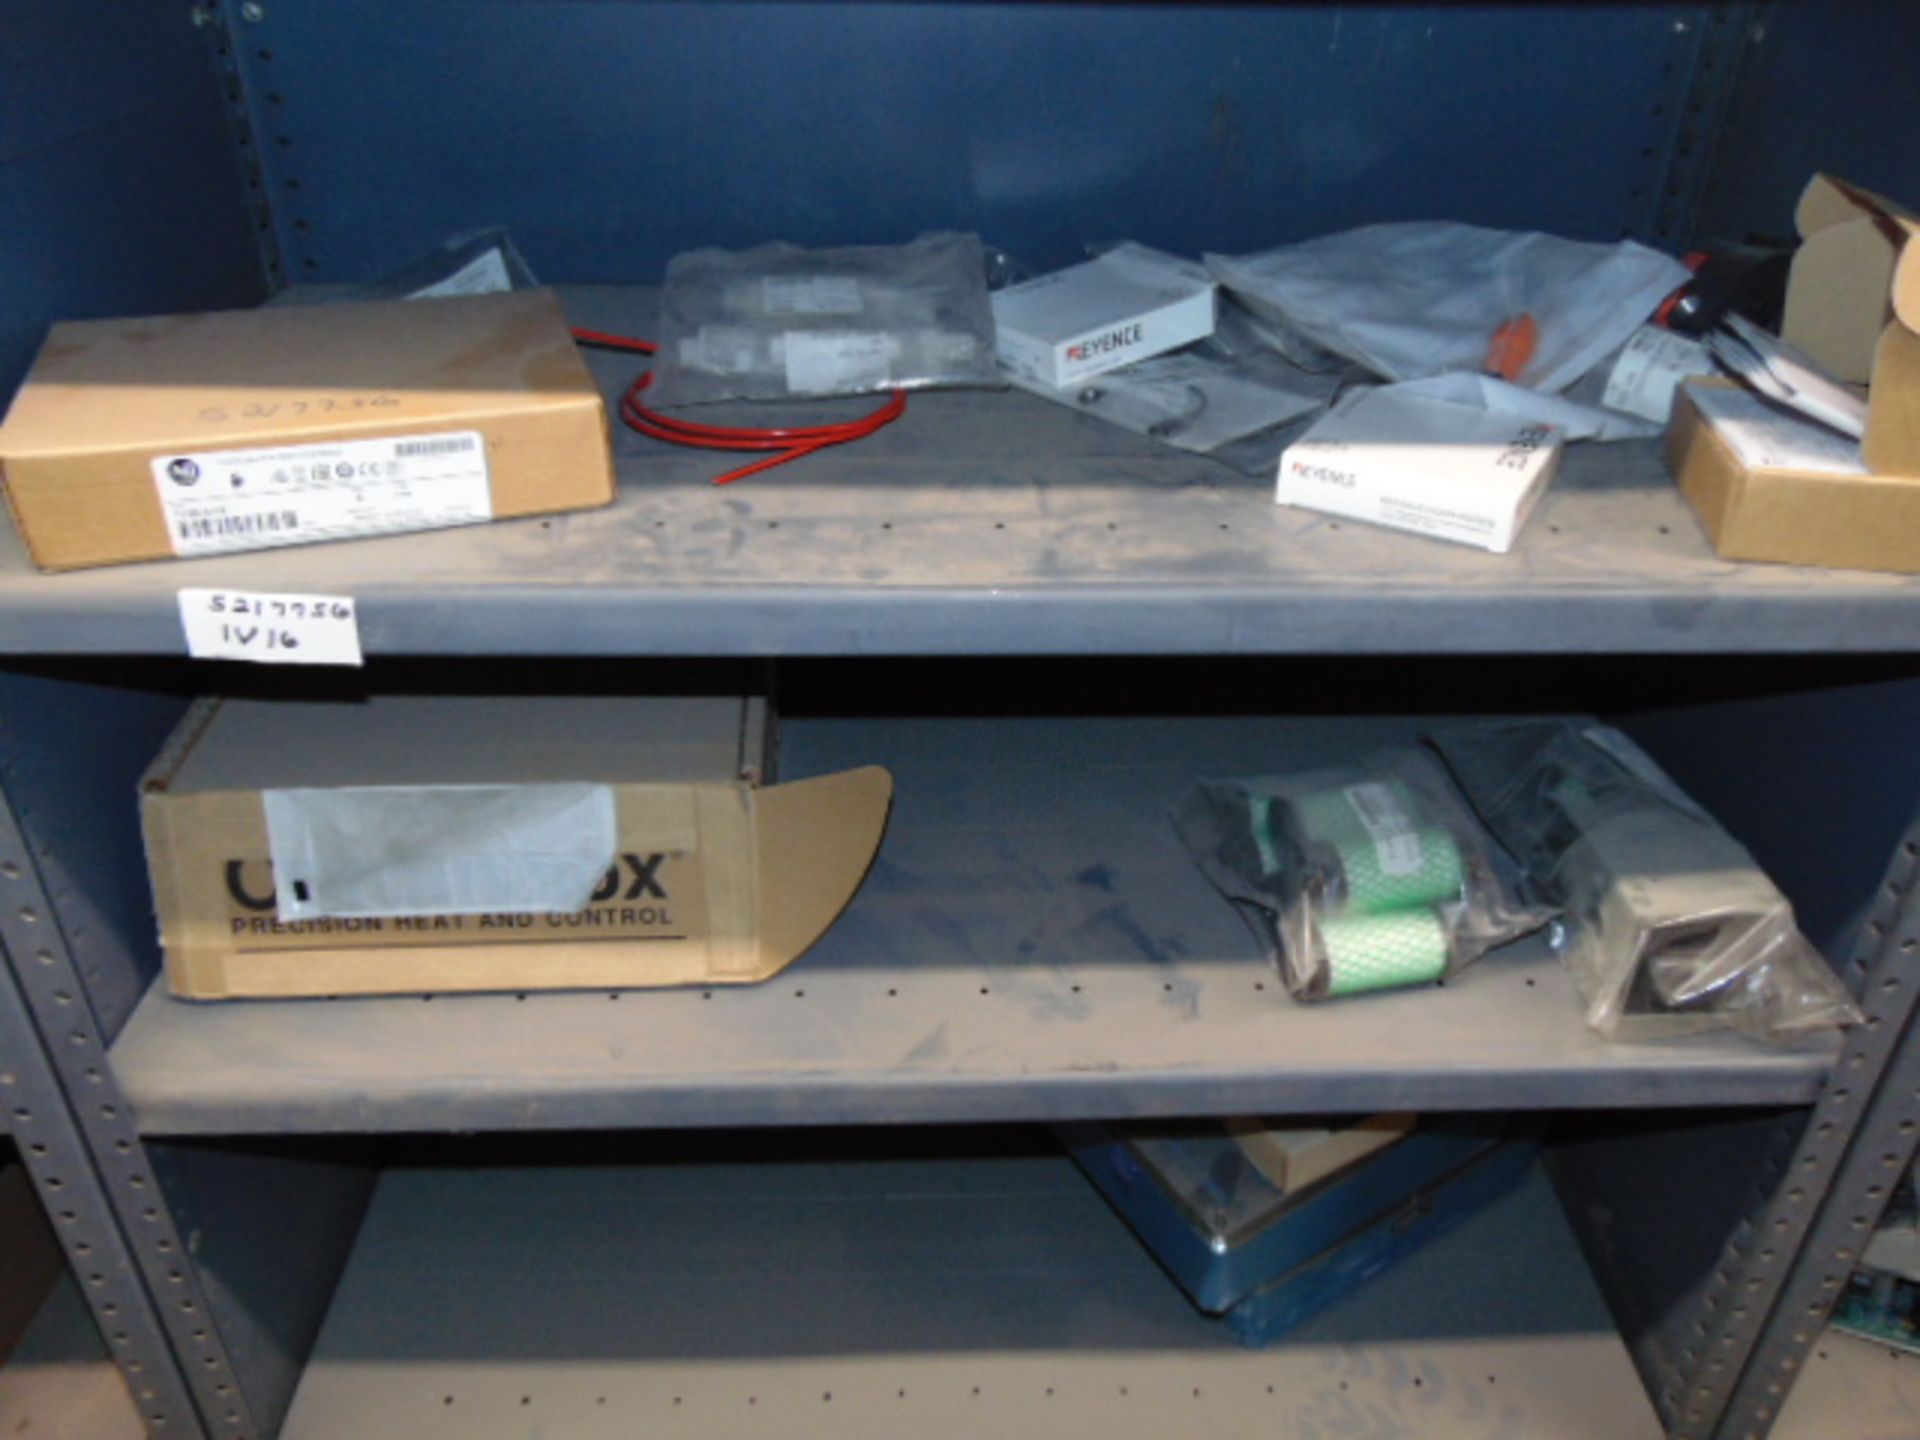 LOT CONSISTING OF: A & B control AC modules, A & B controllers, assorted cables & misc., assorted ( - Image 4 of 7